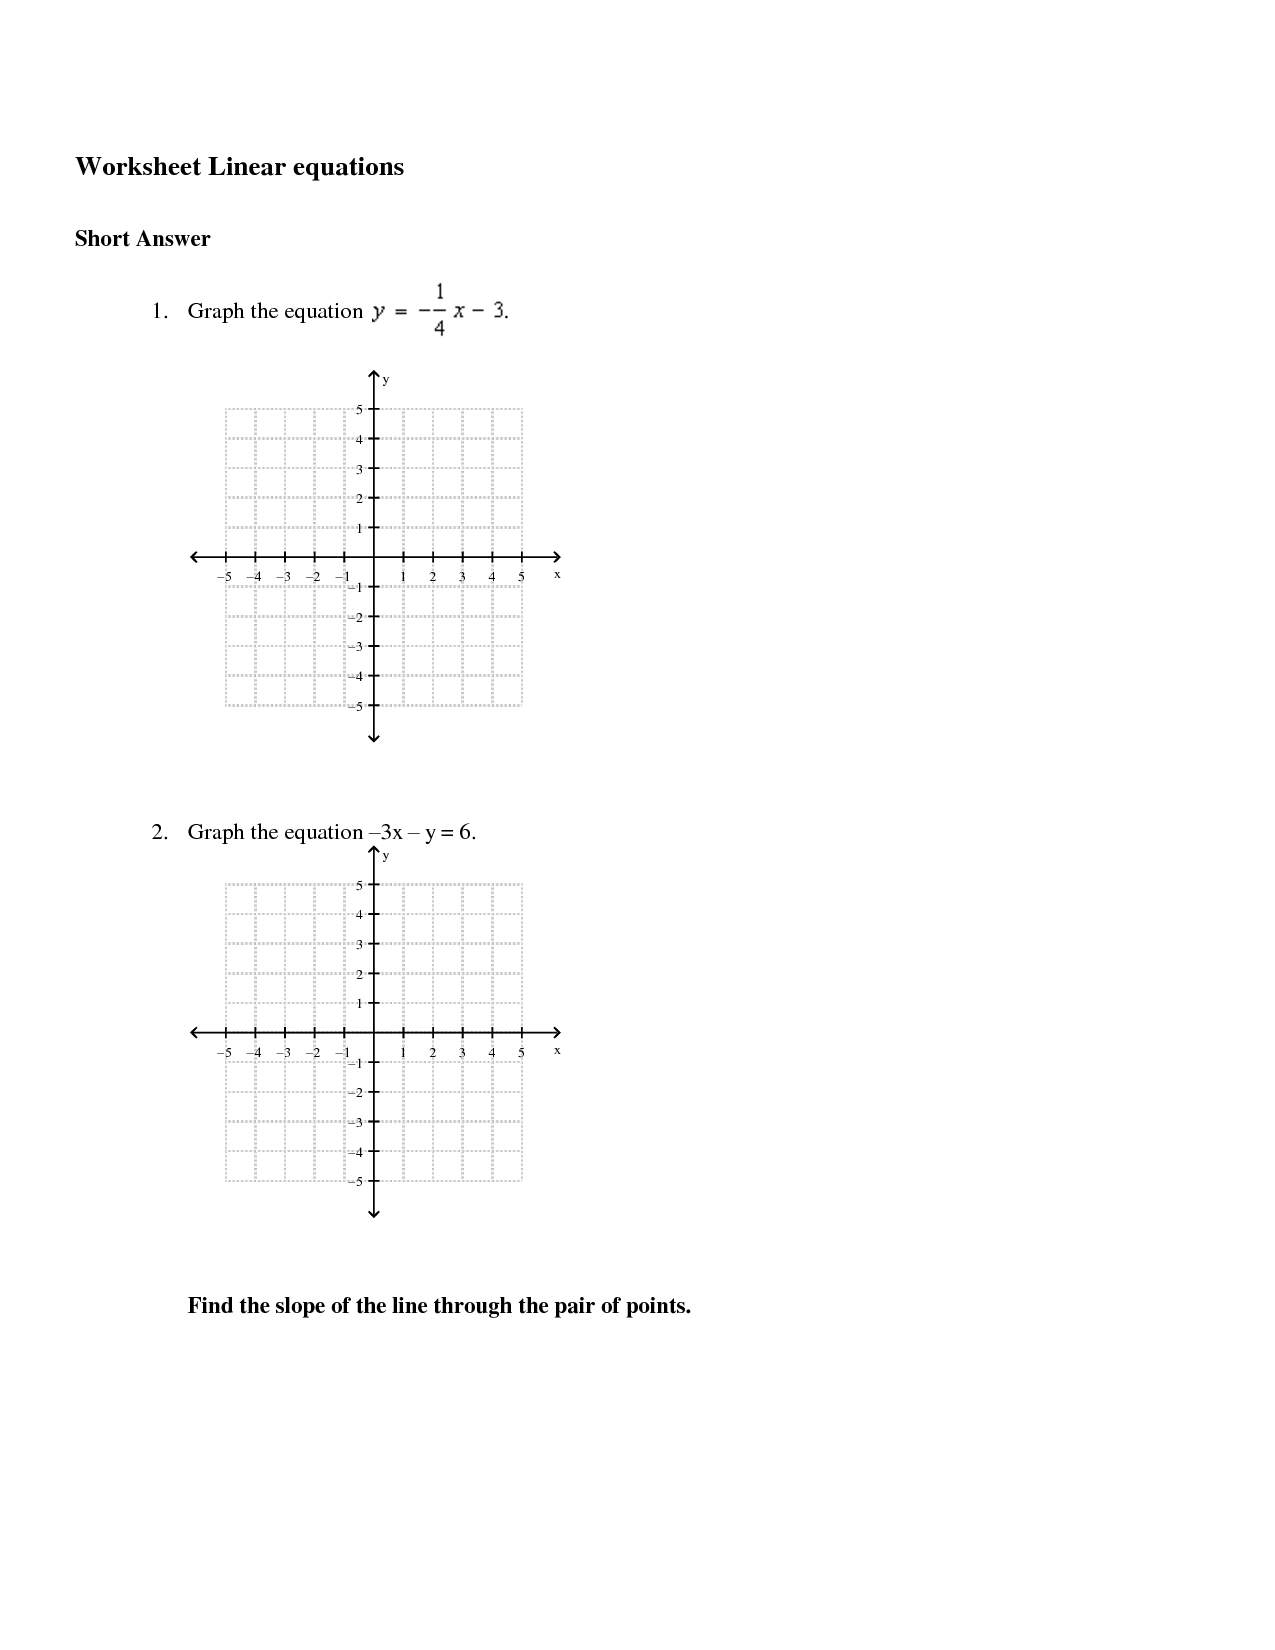 Graph Linear Equations Worksheet Answers Image